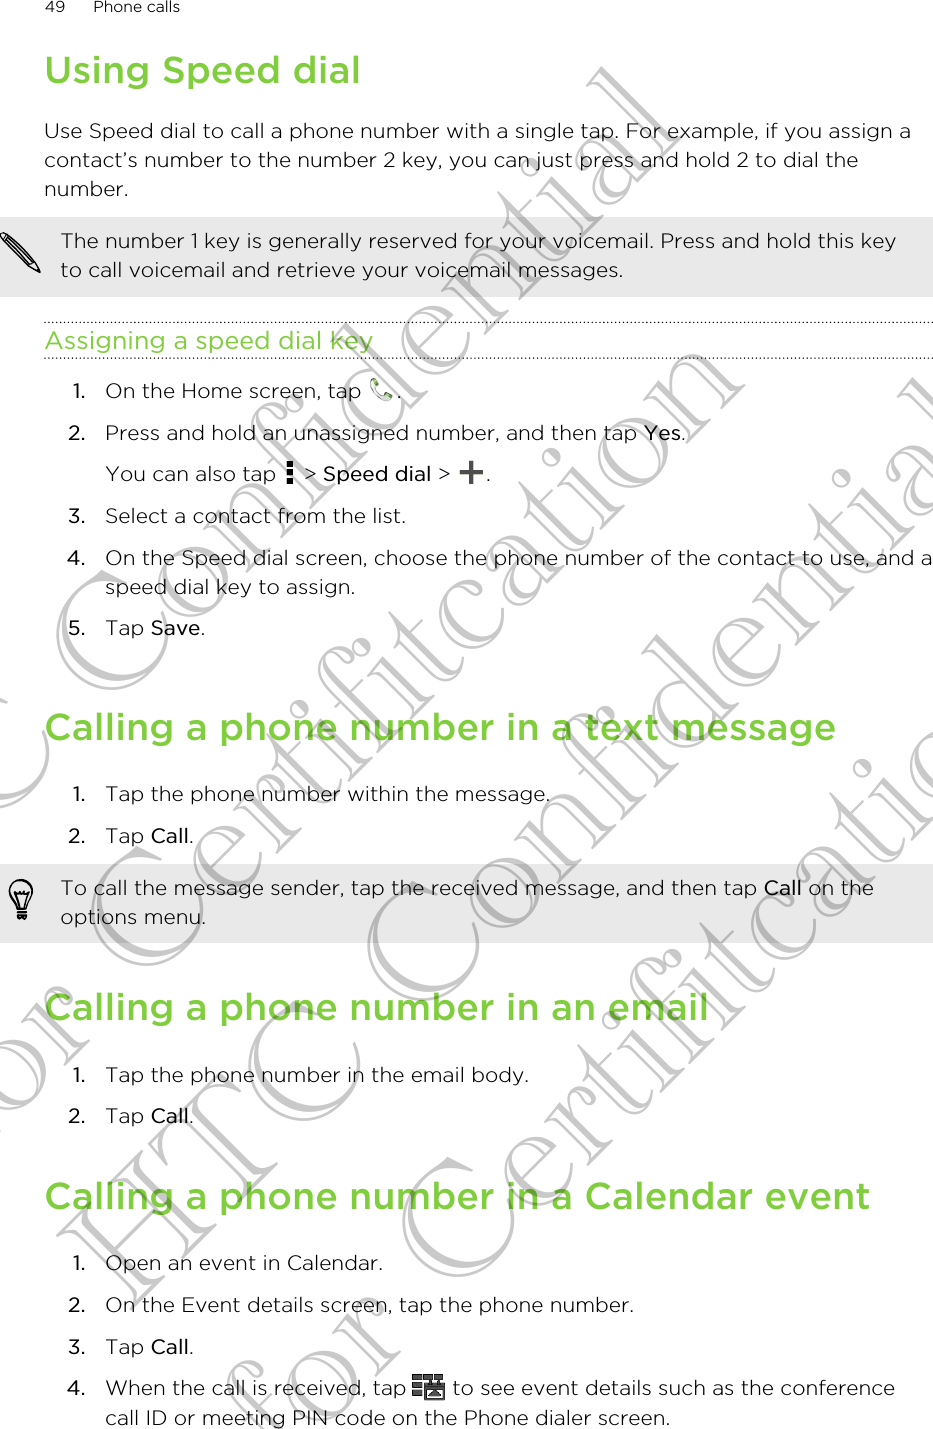 Using Speed dialUse Speed dial to call a phone number with a single tap. For example, if you assign acontact’s number to the number 2 key, you can just press and hold 2 to dial thenumber.The number 1 key is generally reserved for your voicemail. Press and hold this keyto call voicemail and retrieve your voicemail messages.Assigning a speed dial key1. On the Home screen, tap  .2. Press and hold an unassigned number, and then tap Yes. You can also tap   &gt; Speed dial &gt;  .3. Select a contact from the list.4. On the Speed dial screen, choose the phone number of the contact to use, and aspeed dial key to assign.5. Tap Save.Calling a phone number in a text message1. Tap the phone number within the message.2. Tap Call. To call the message sender, tap the received message, and then tap Call on theoptions menu.Calling a phone number in an email1. Tap the phone number in the email body.2. Tap Call.Calling a phone number in a Calendar event1. Open an event in Calendar.2. On the Event details screen, tap the phone number.3. Tap Call.4. When the call is received, tap   to see event details such as the conferencecall ID or meeting PIN code on the Phone dialer screen.49 Phone callsHTC Confidential for Certifitcation HTC Confidential for Certifitcation